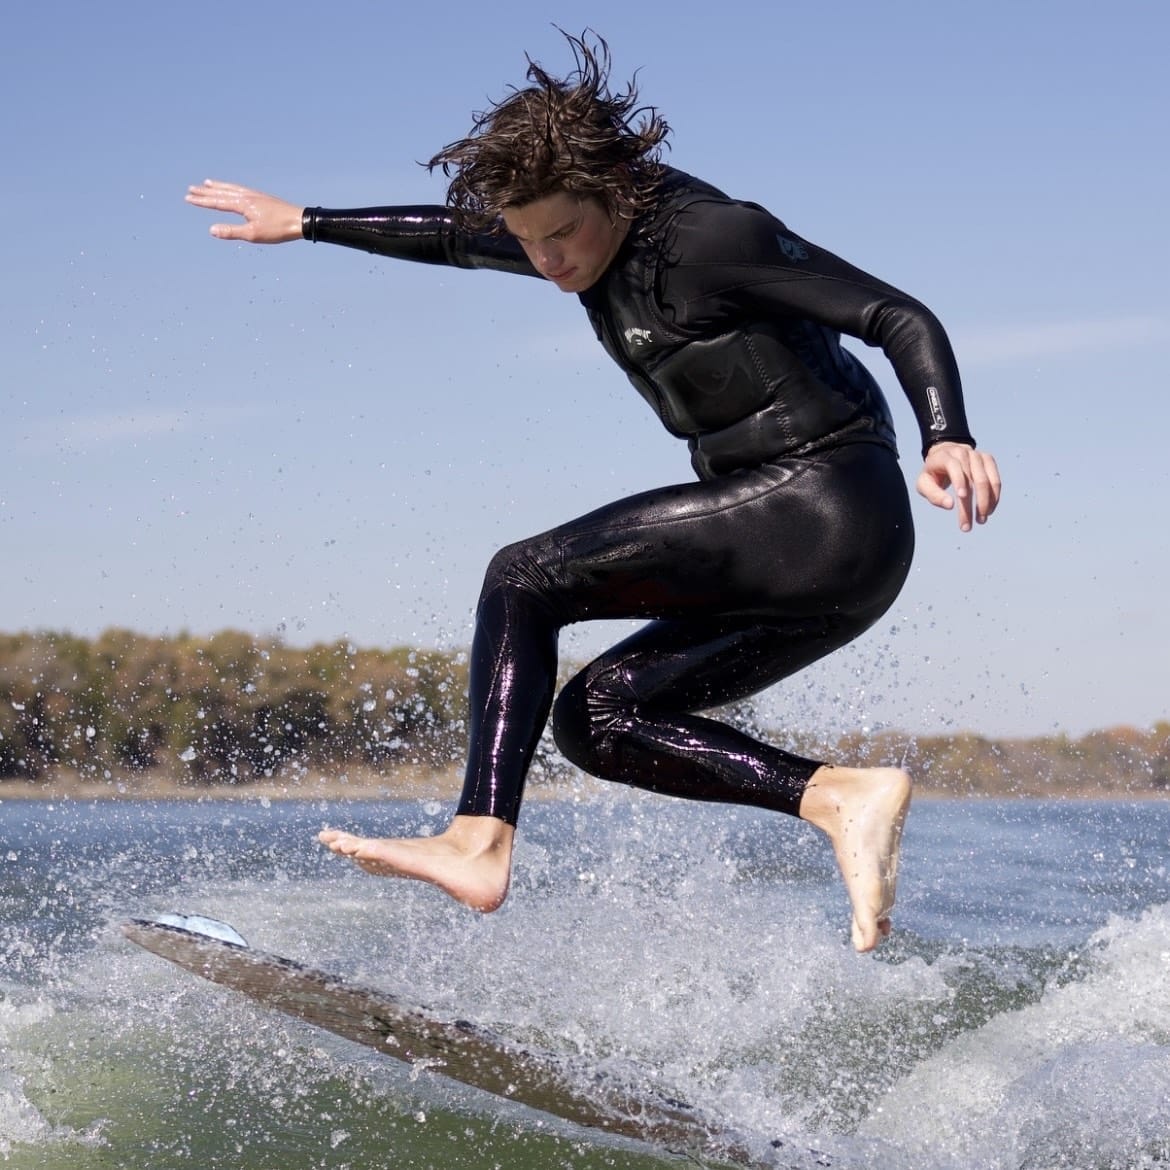 A man in a black wetsuit surfing on a surfboard.